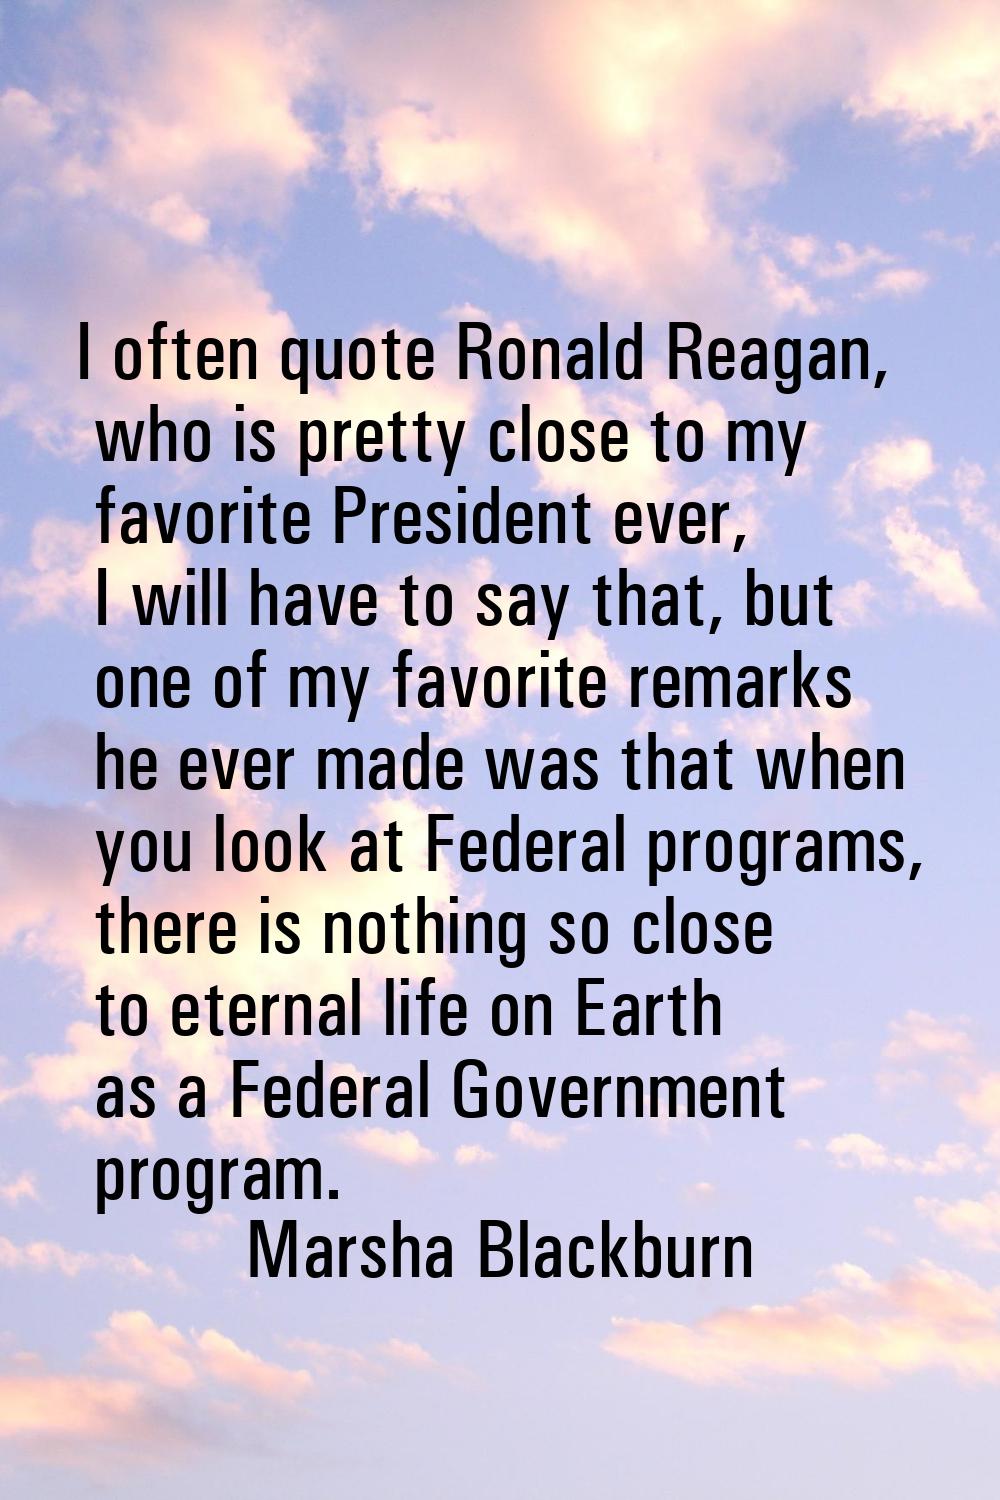 I often quote Ronald Reagan, who is pretty close to my favorite President ever, I will have to say 